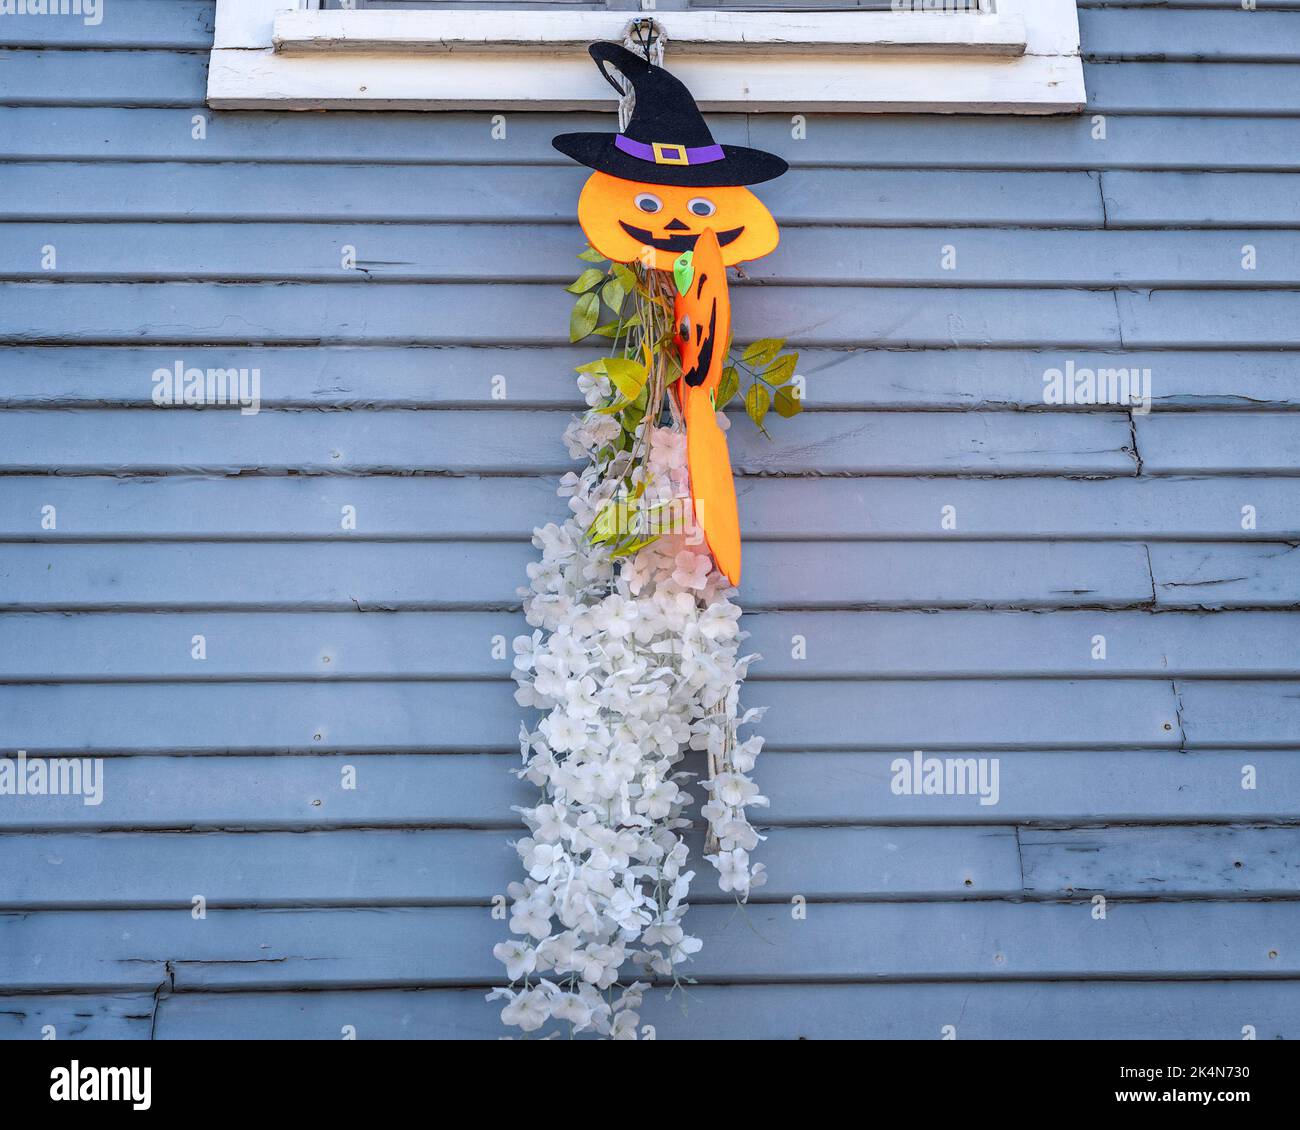 Spooky Halloween decorations in Los Angeles, CA. Stock Photo